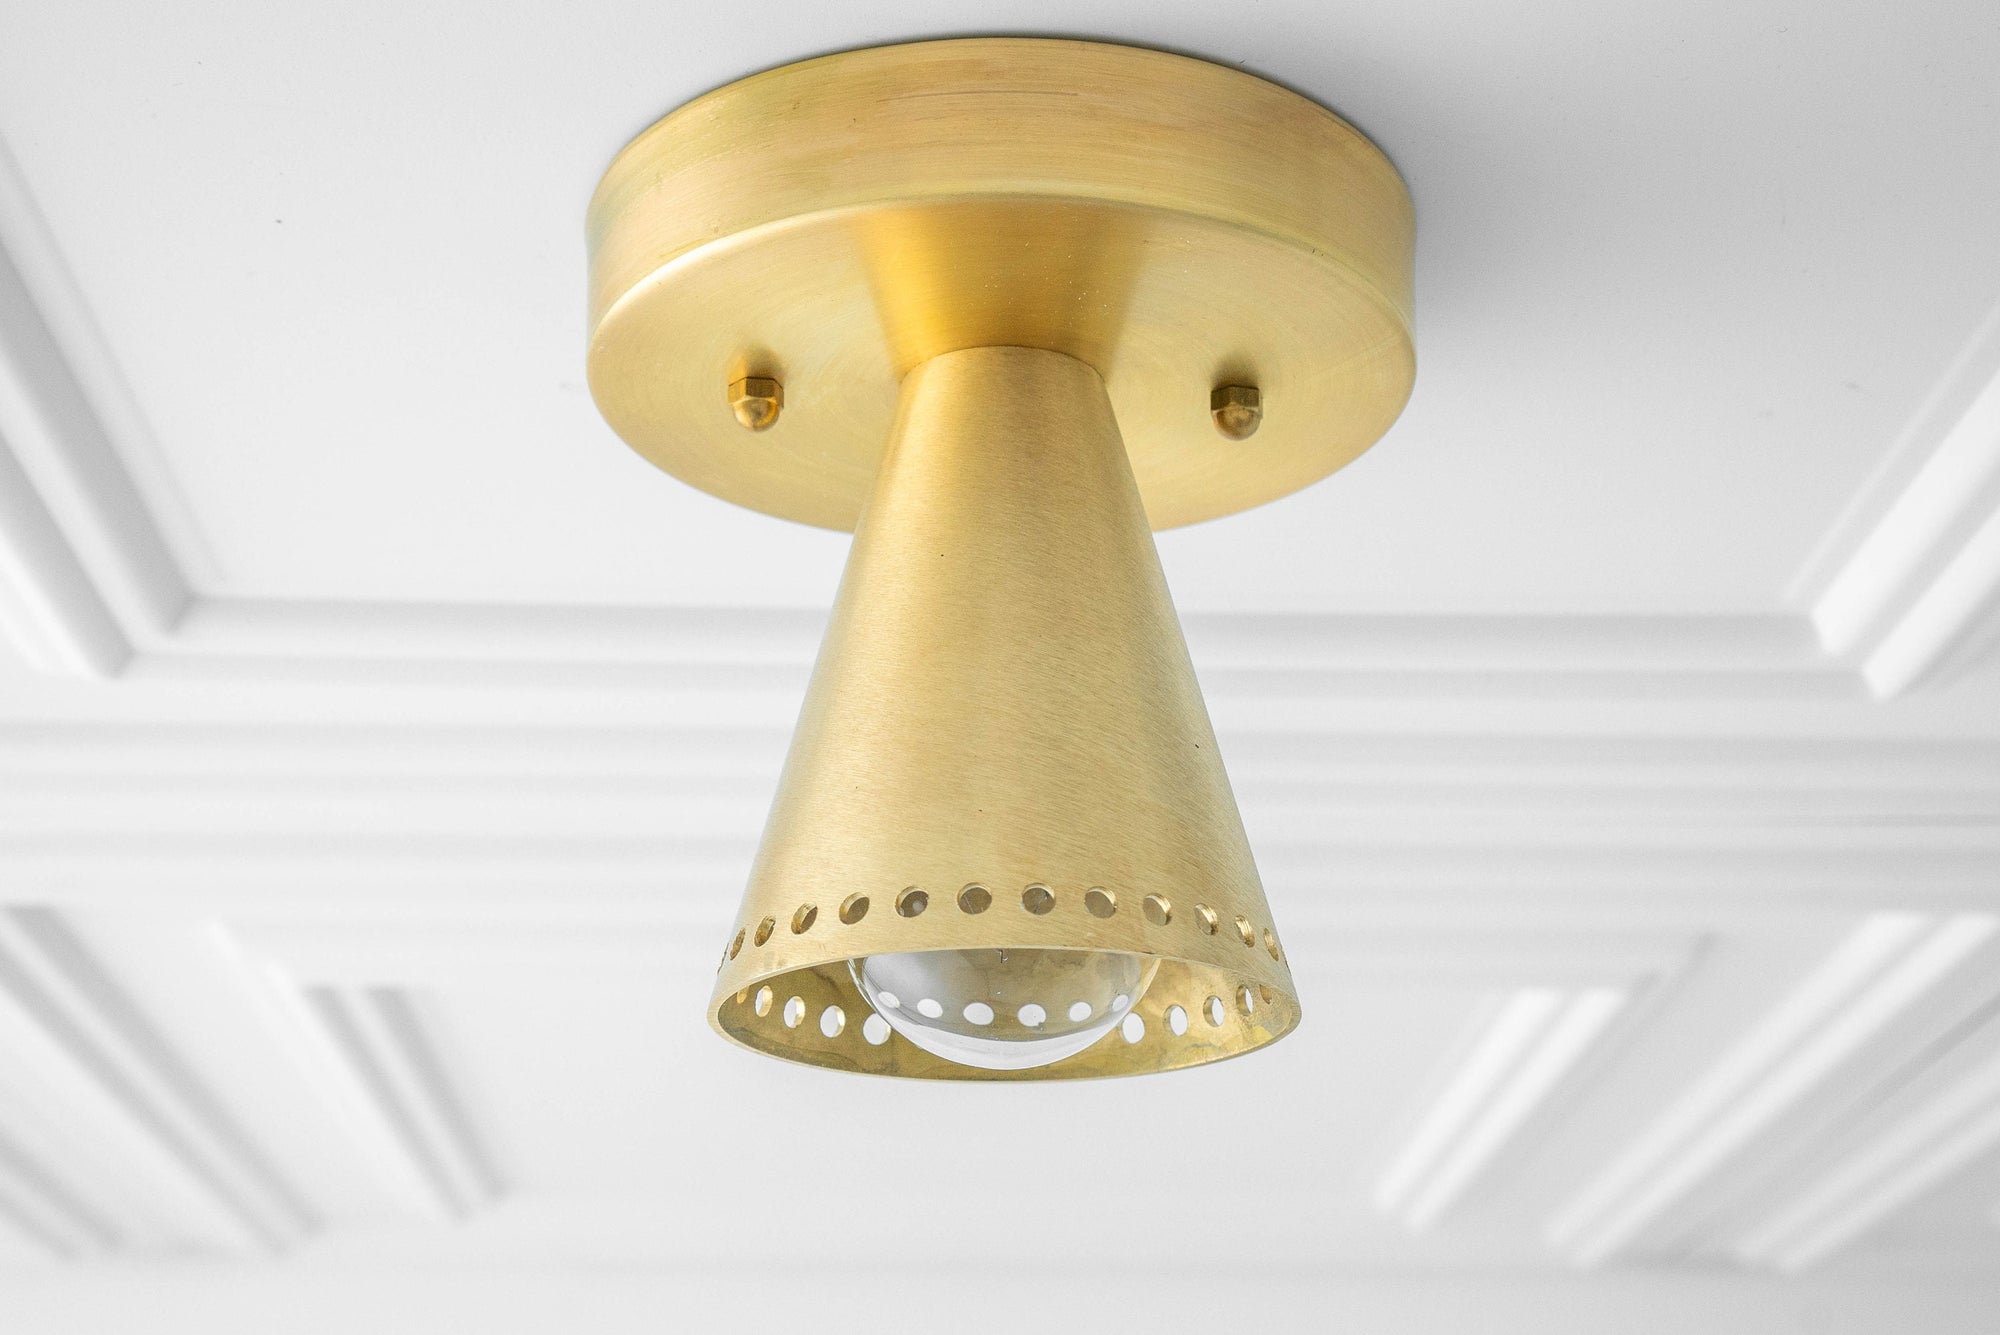 Ceiling Light Model No 8985 Peared